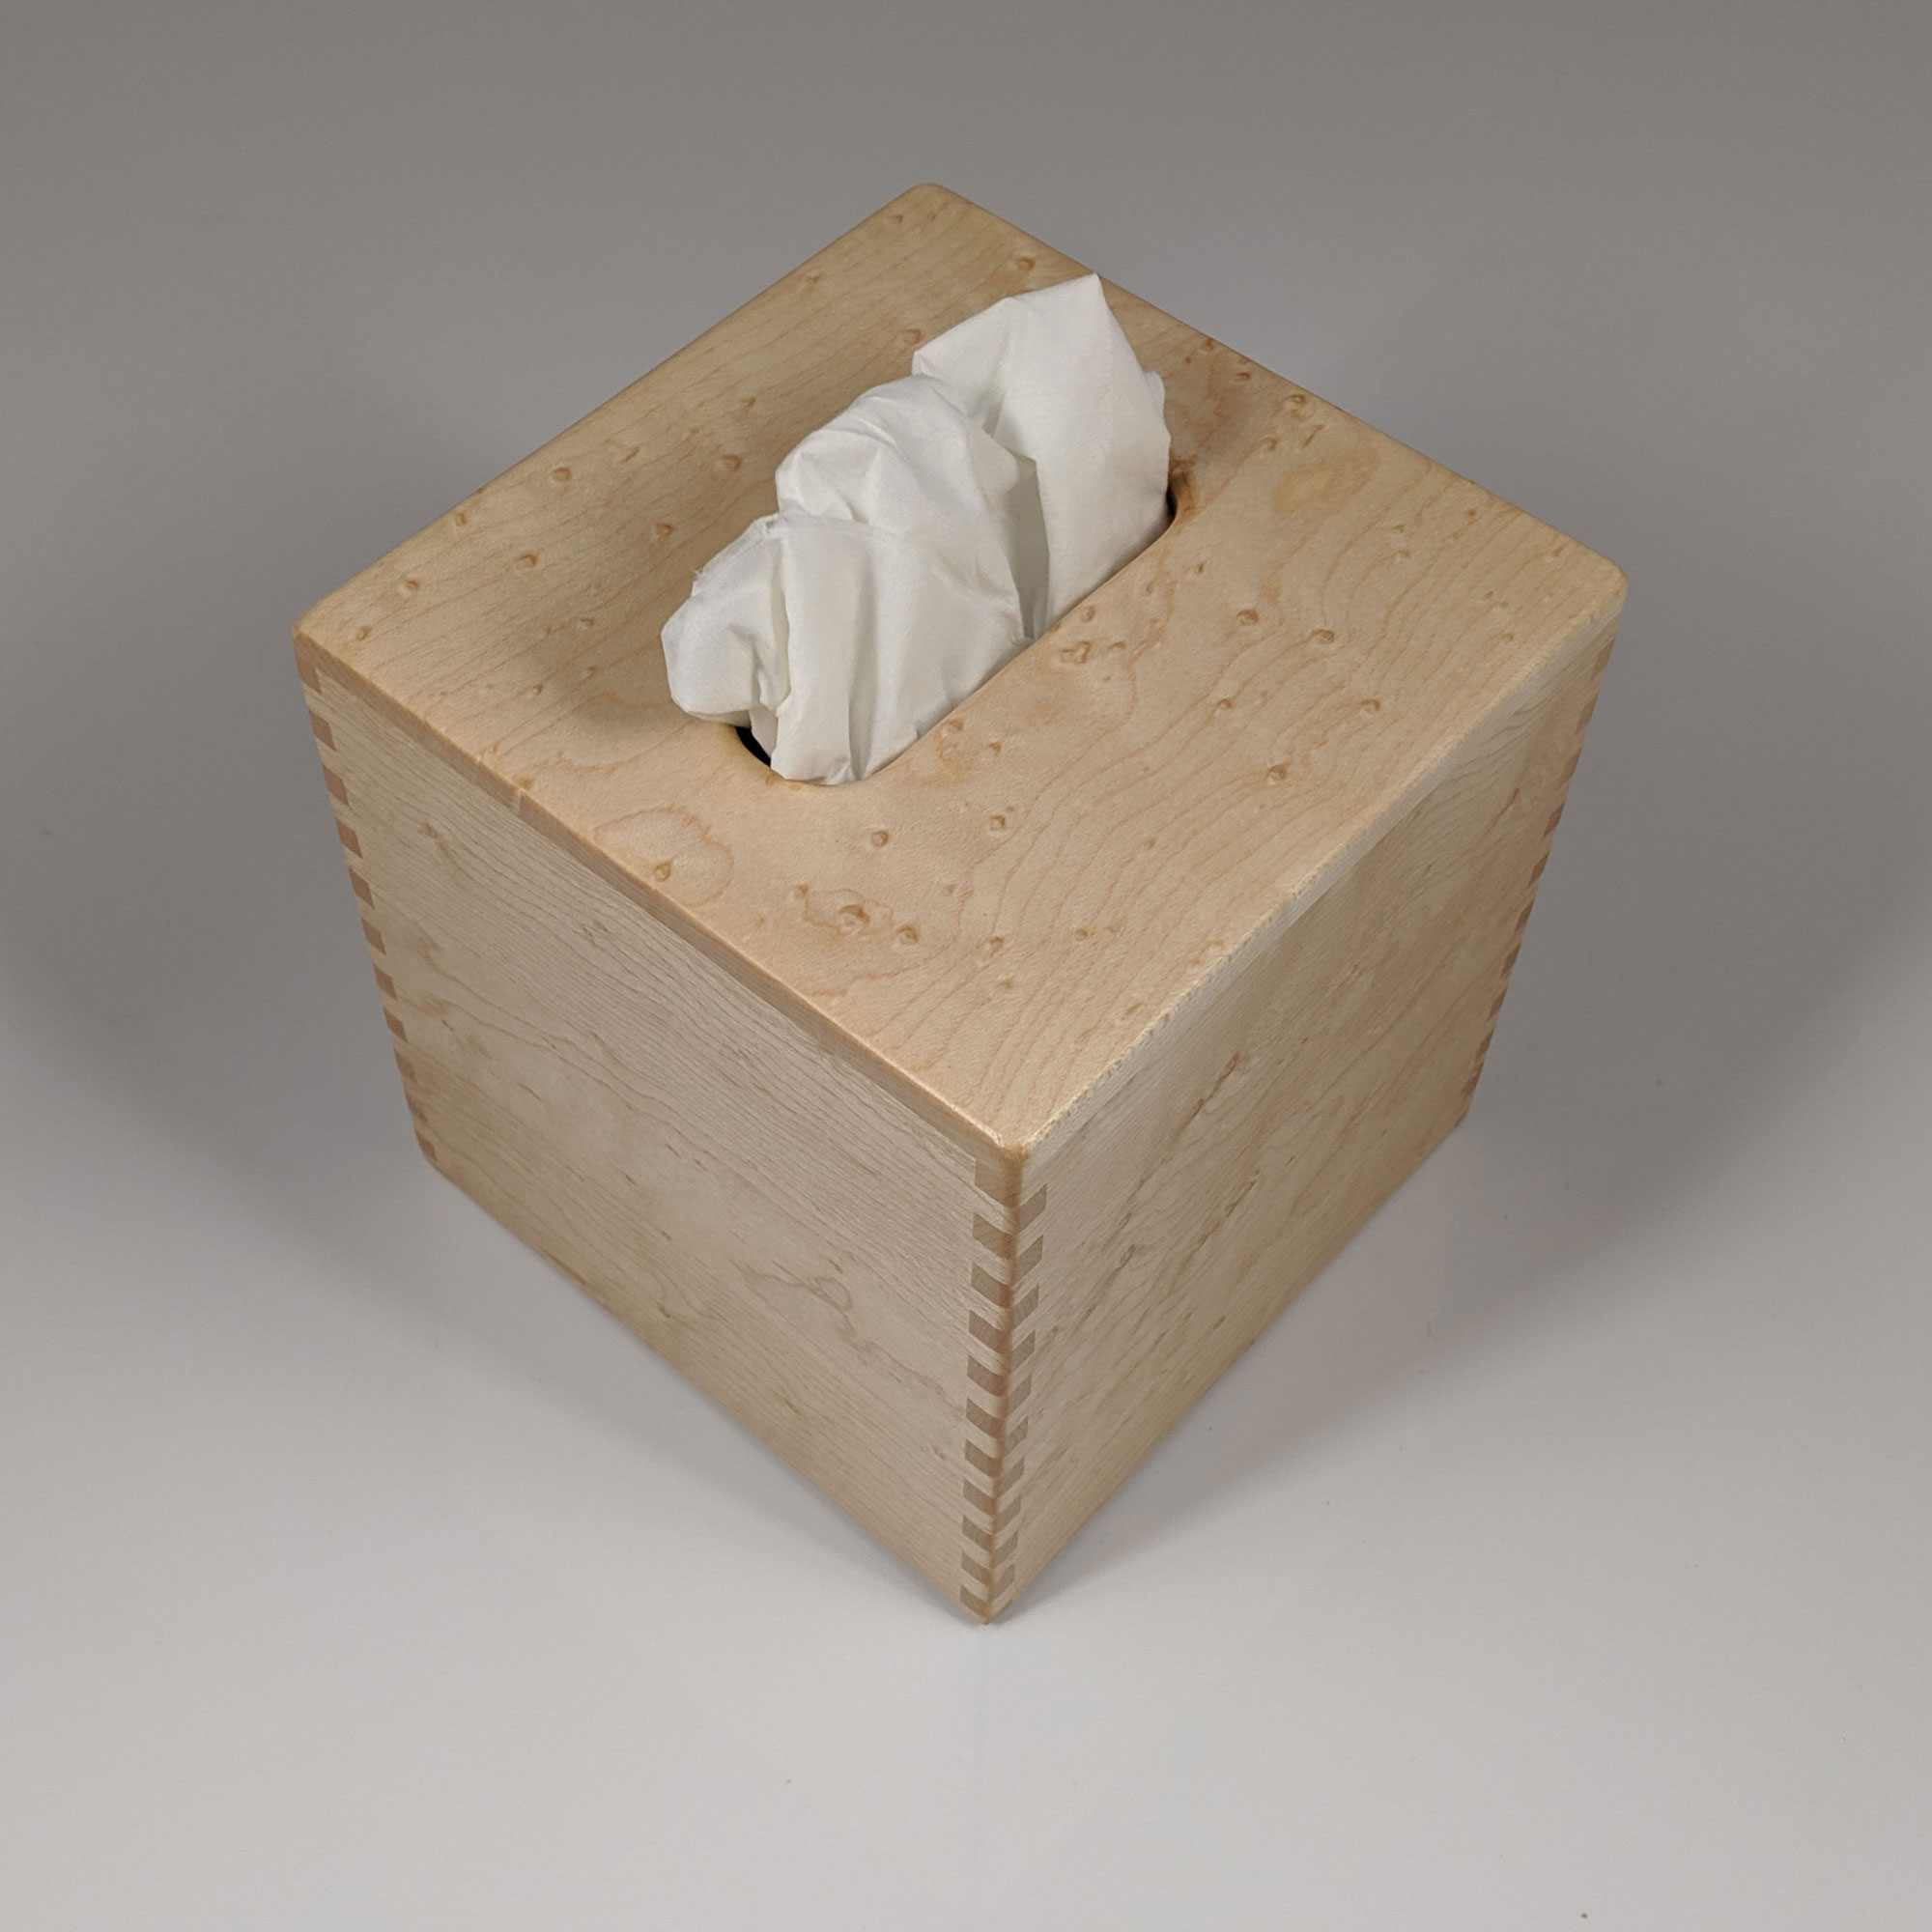 https://www.playingwithwood.com/wp-content/uploads/2019/09/Tissue-Box-Small-Birdseye-Maple-Box-Jointed-Sides-10.jpg